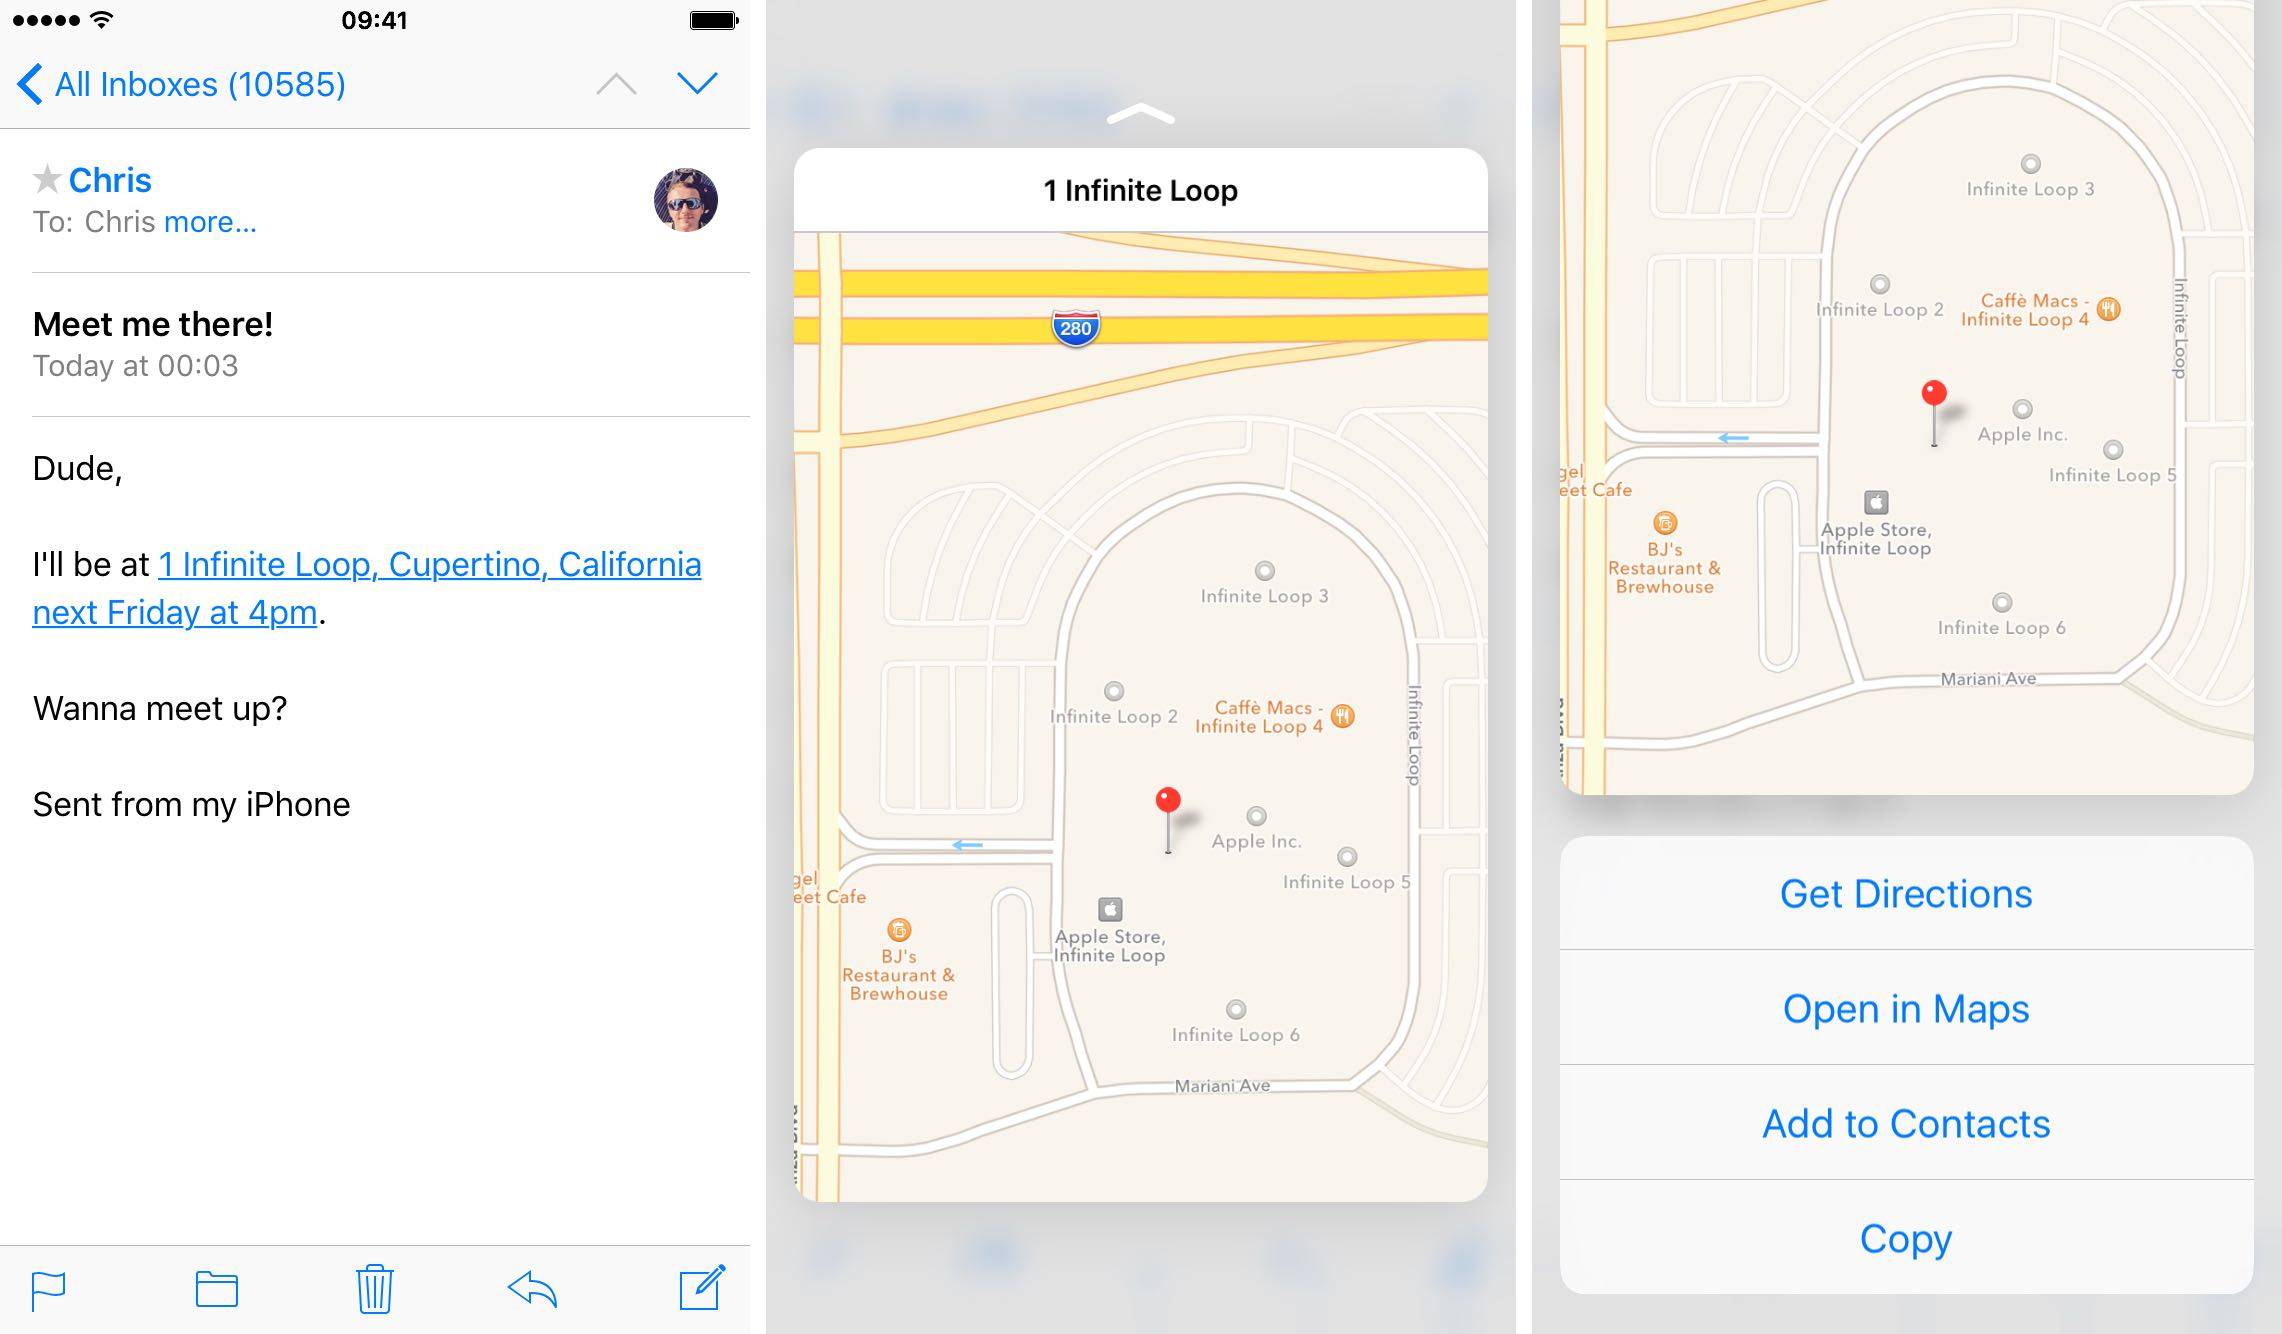 iOS 9 Mail 3D Touch Apple Maps preview iPhone 6s screenshot 002